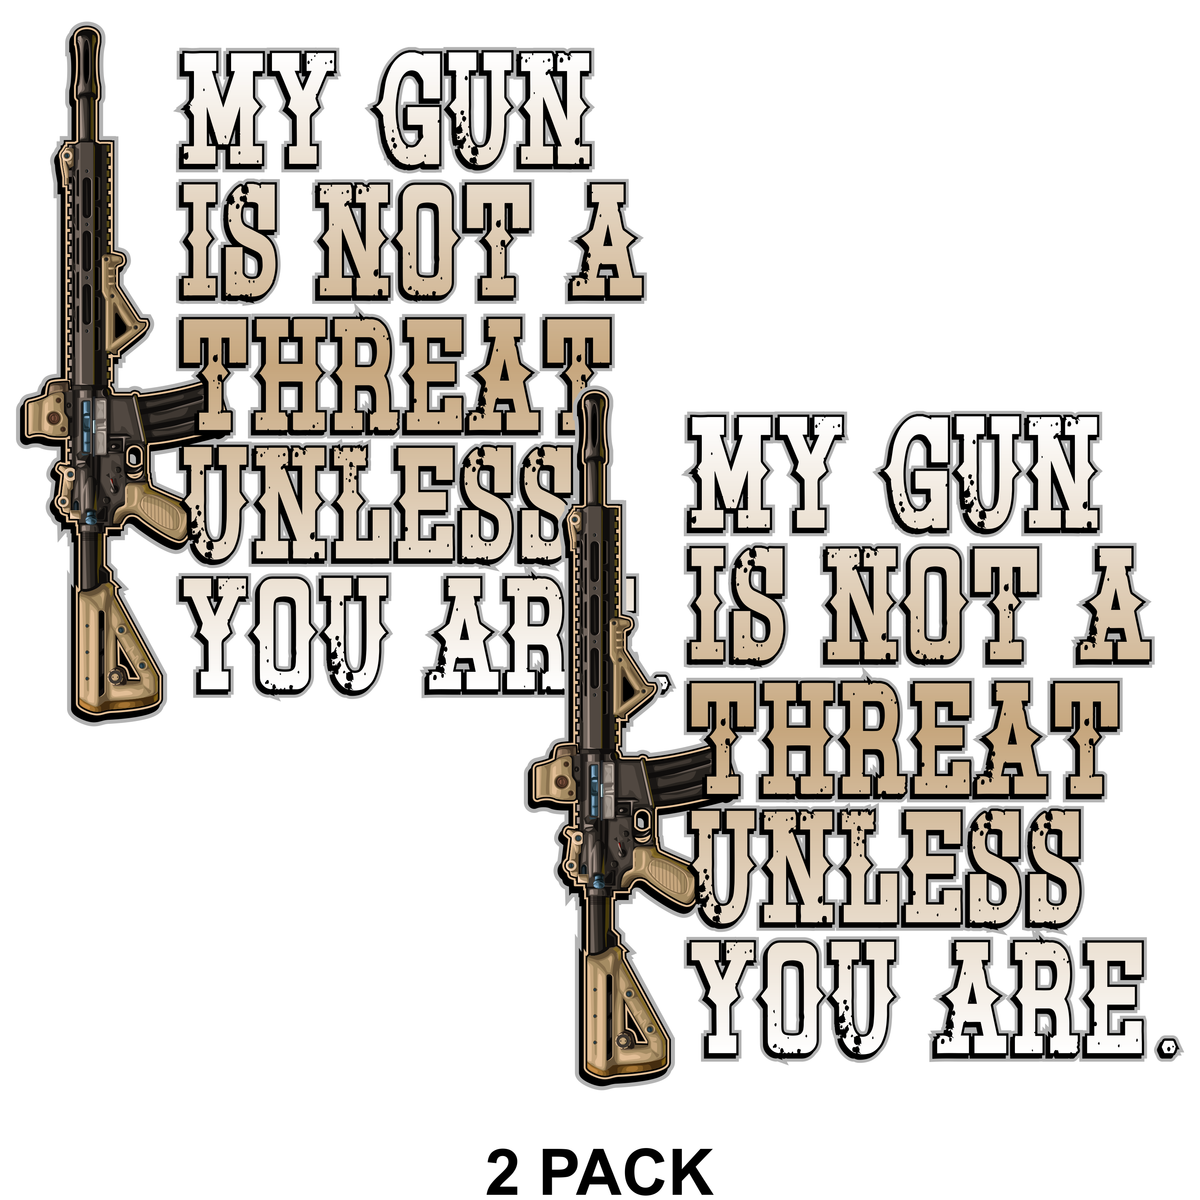 2 Pack - My Gun Is Not A Threat - PermaSticker  -UV Inks - Free Shipping